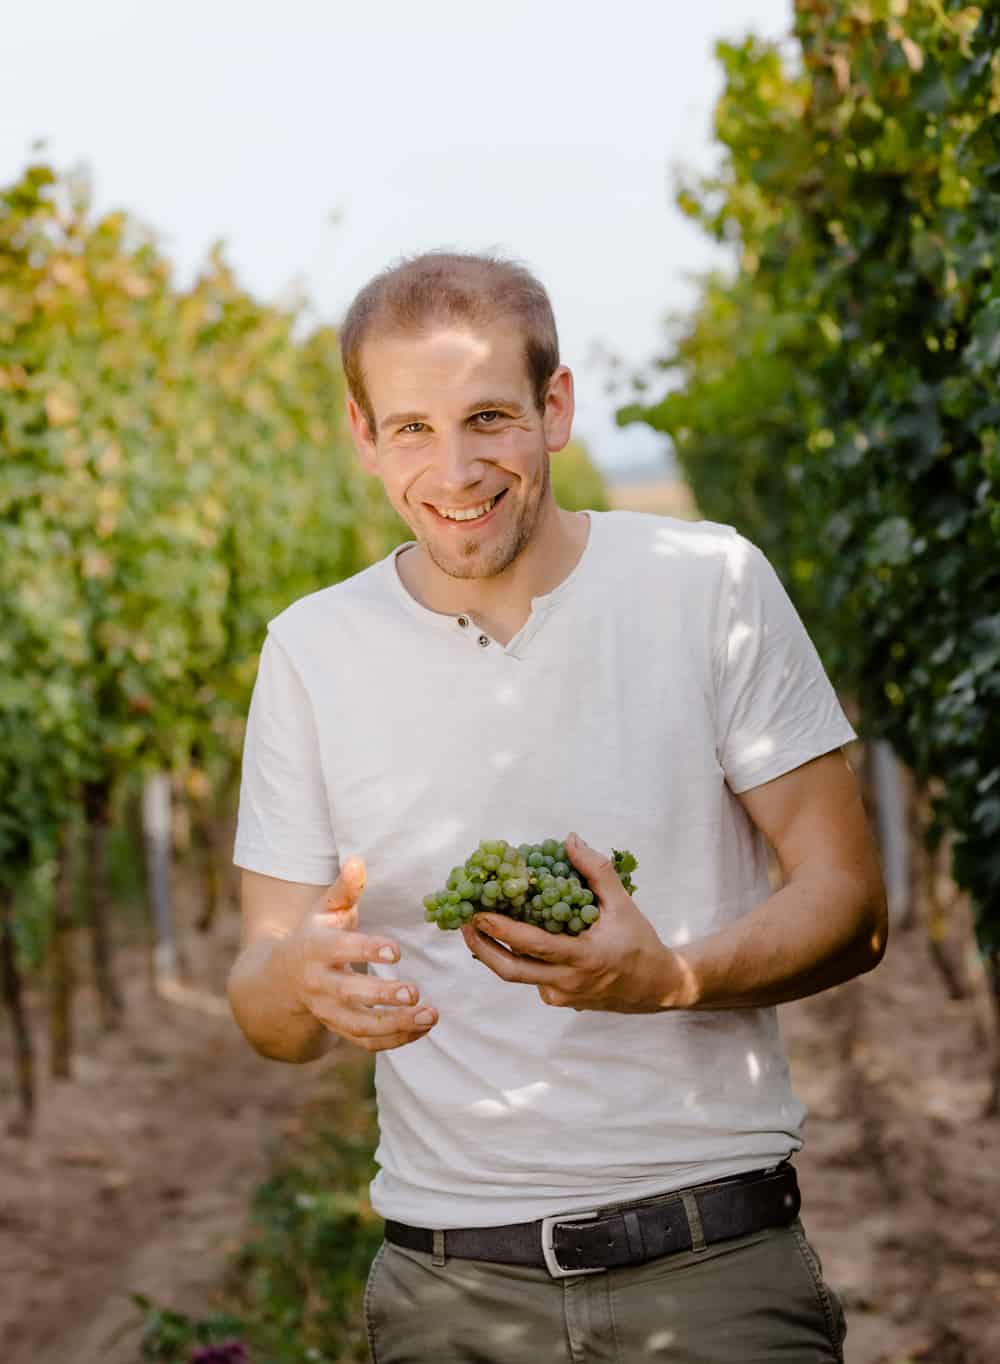 Stefan Pratsch in the vineyard with grapes